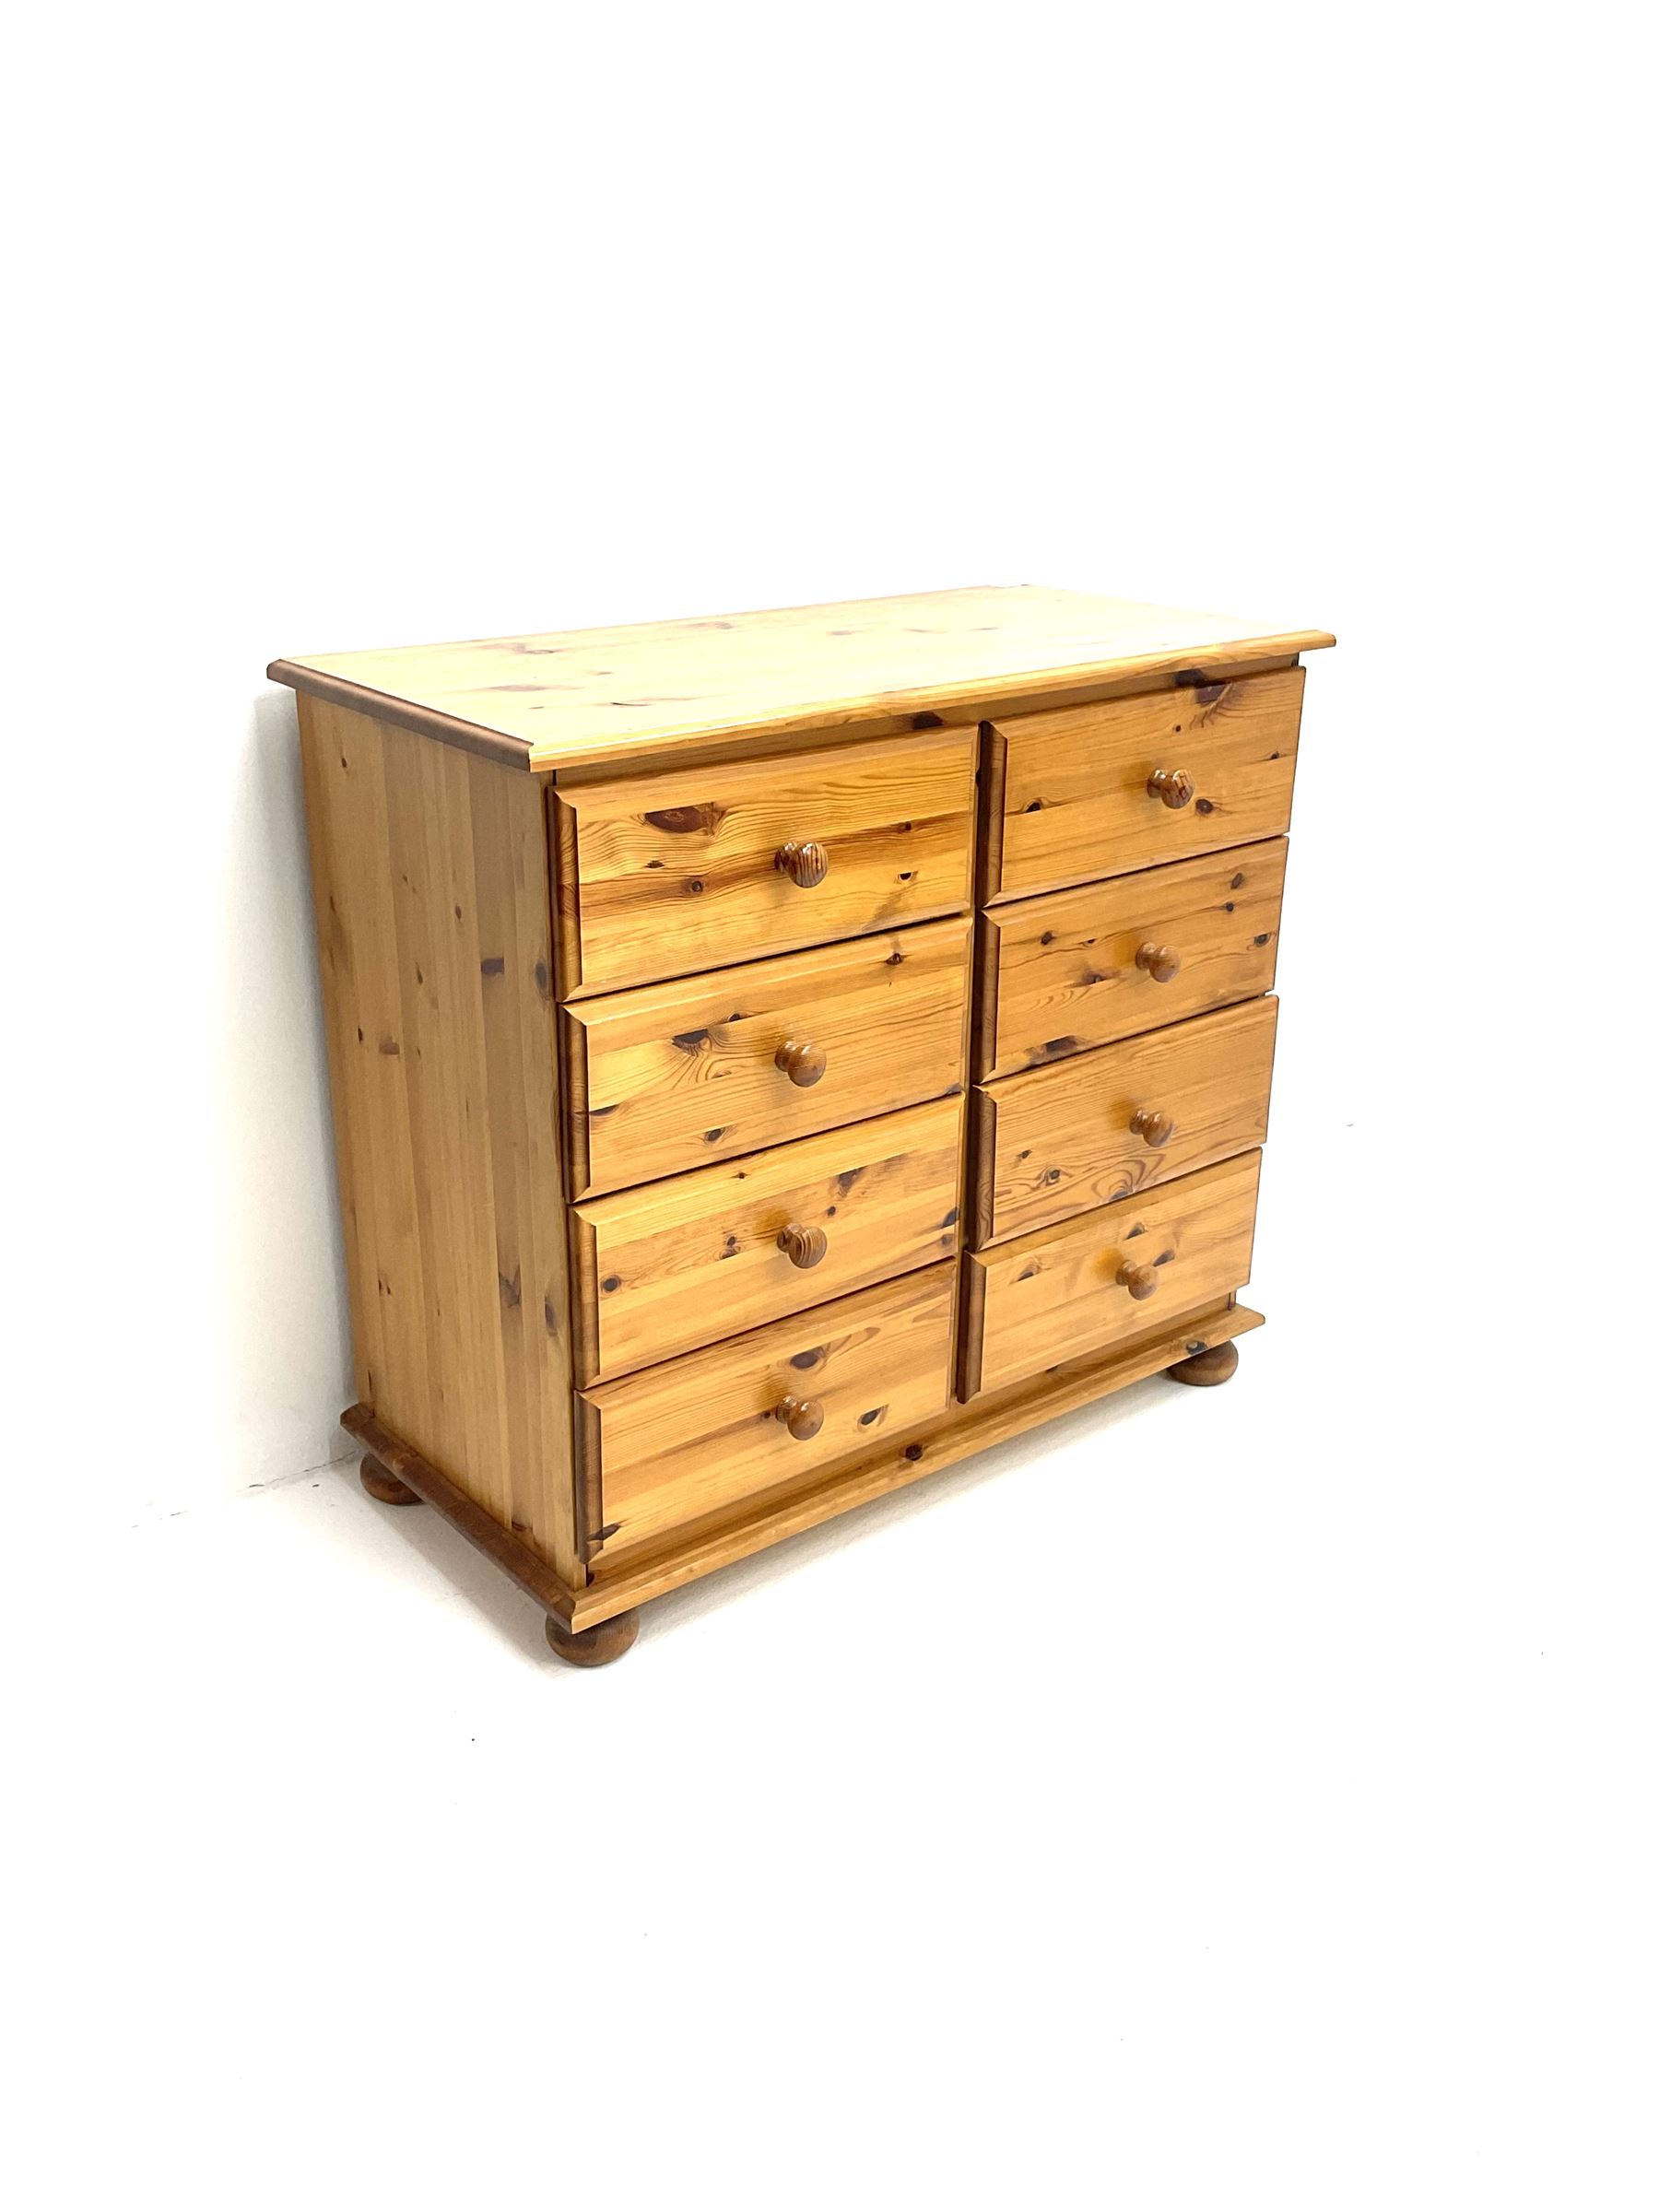 Polished pine chest fitted with eight drawers - Image 2 of 3